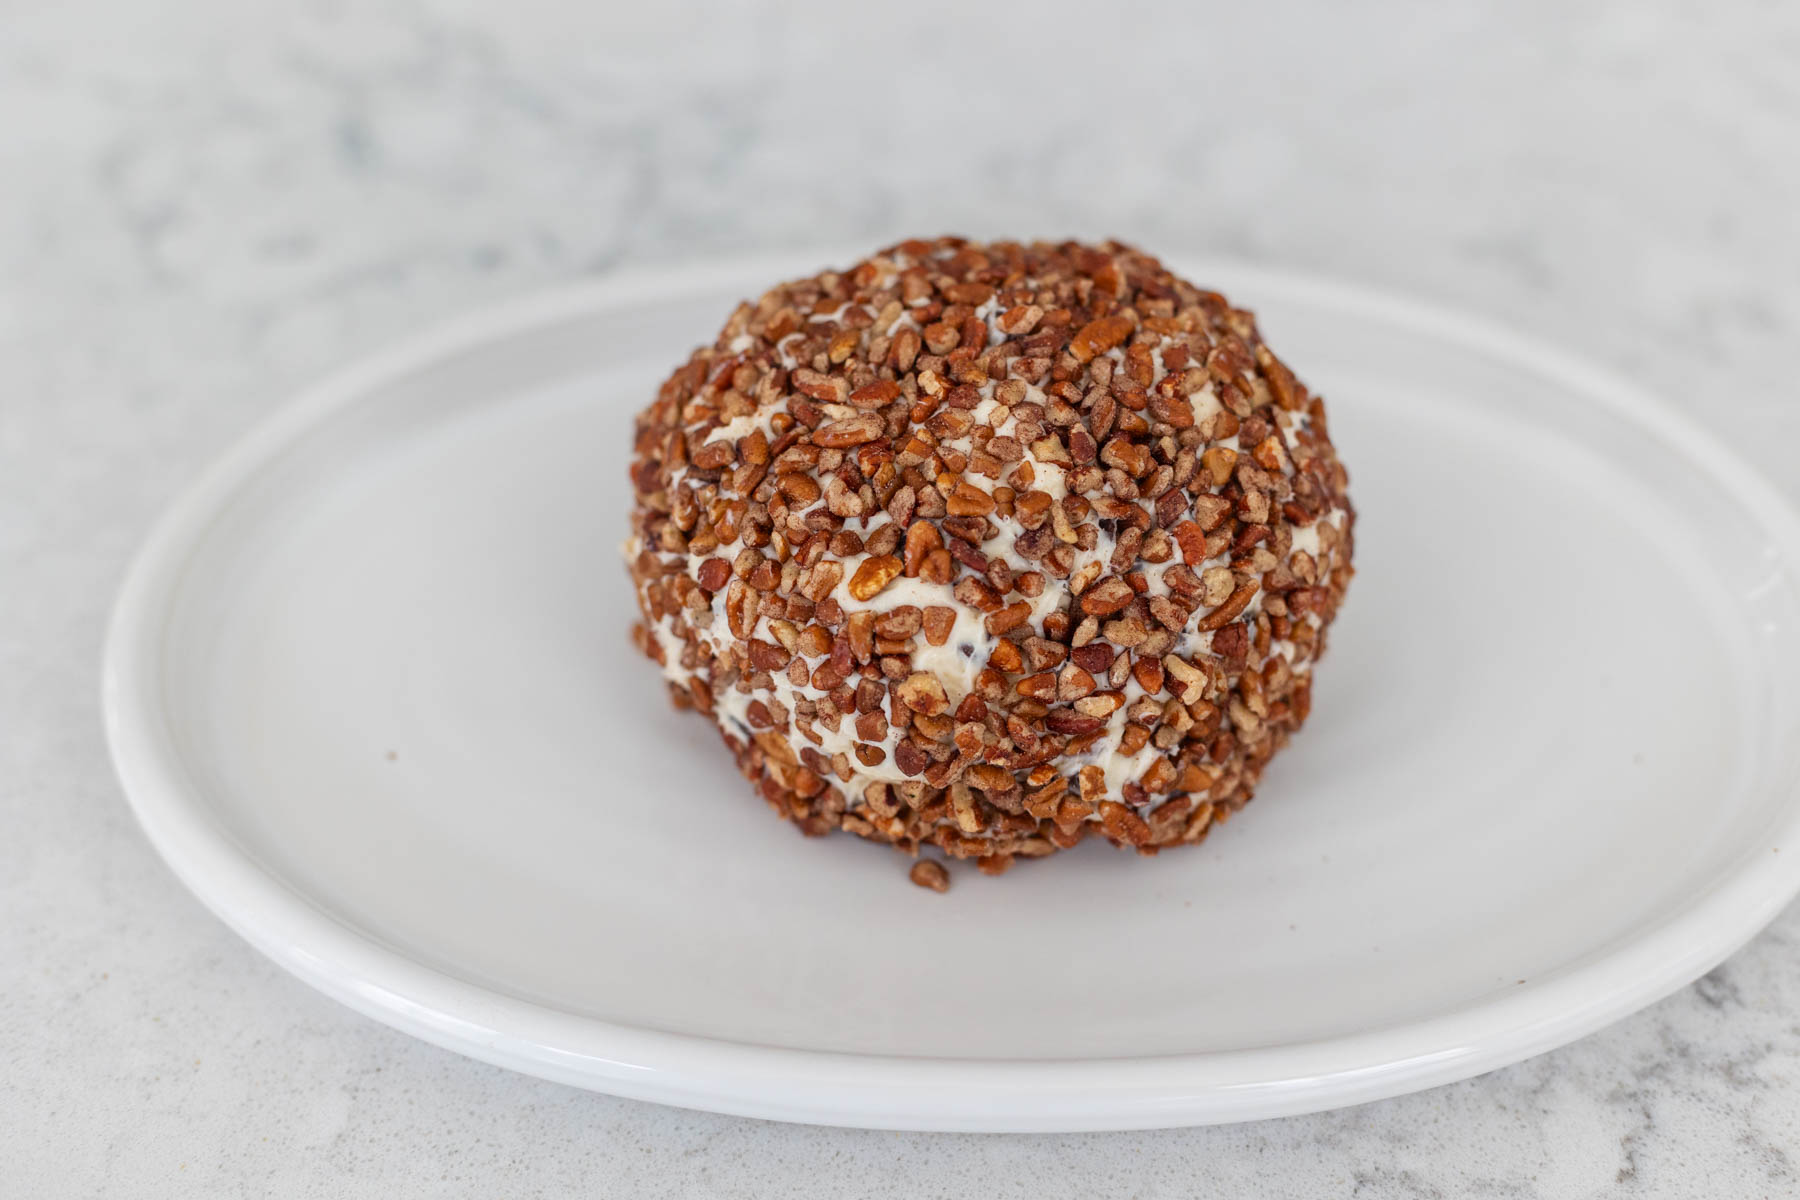 The coated sweet cheese ball is sitting on a white platter ready for the fridge.